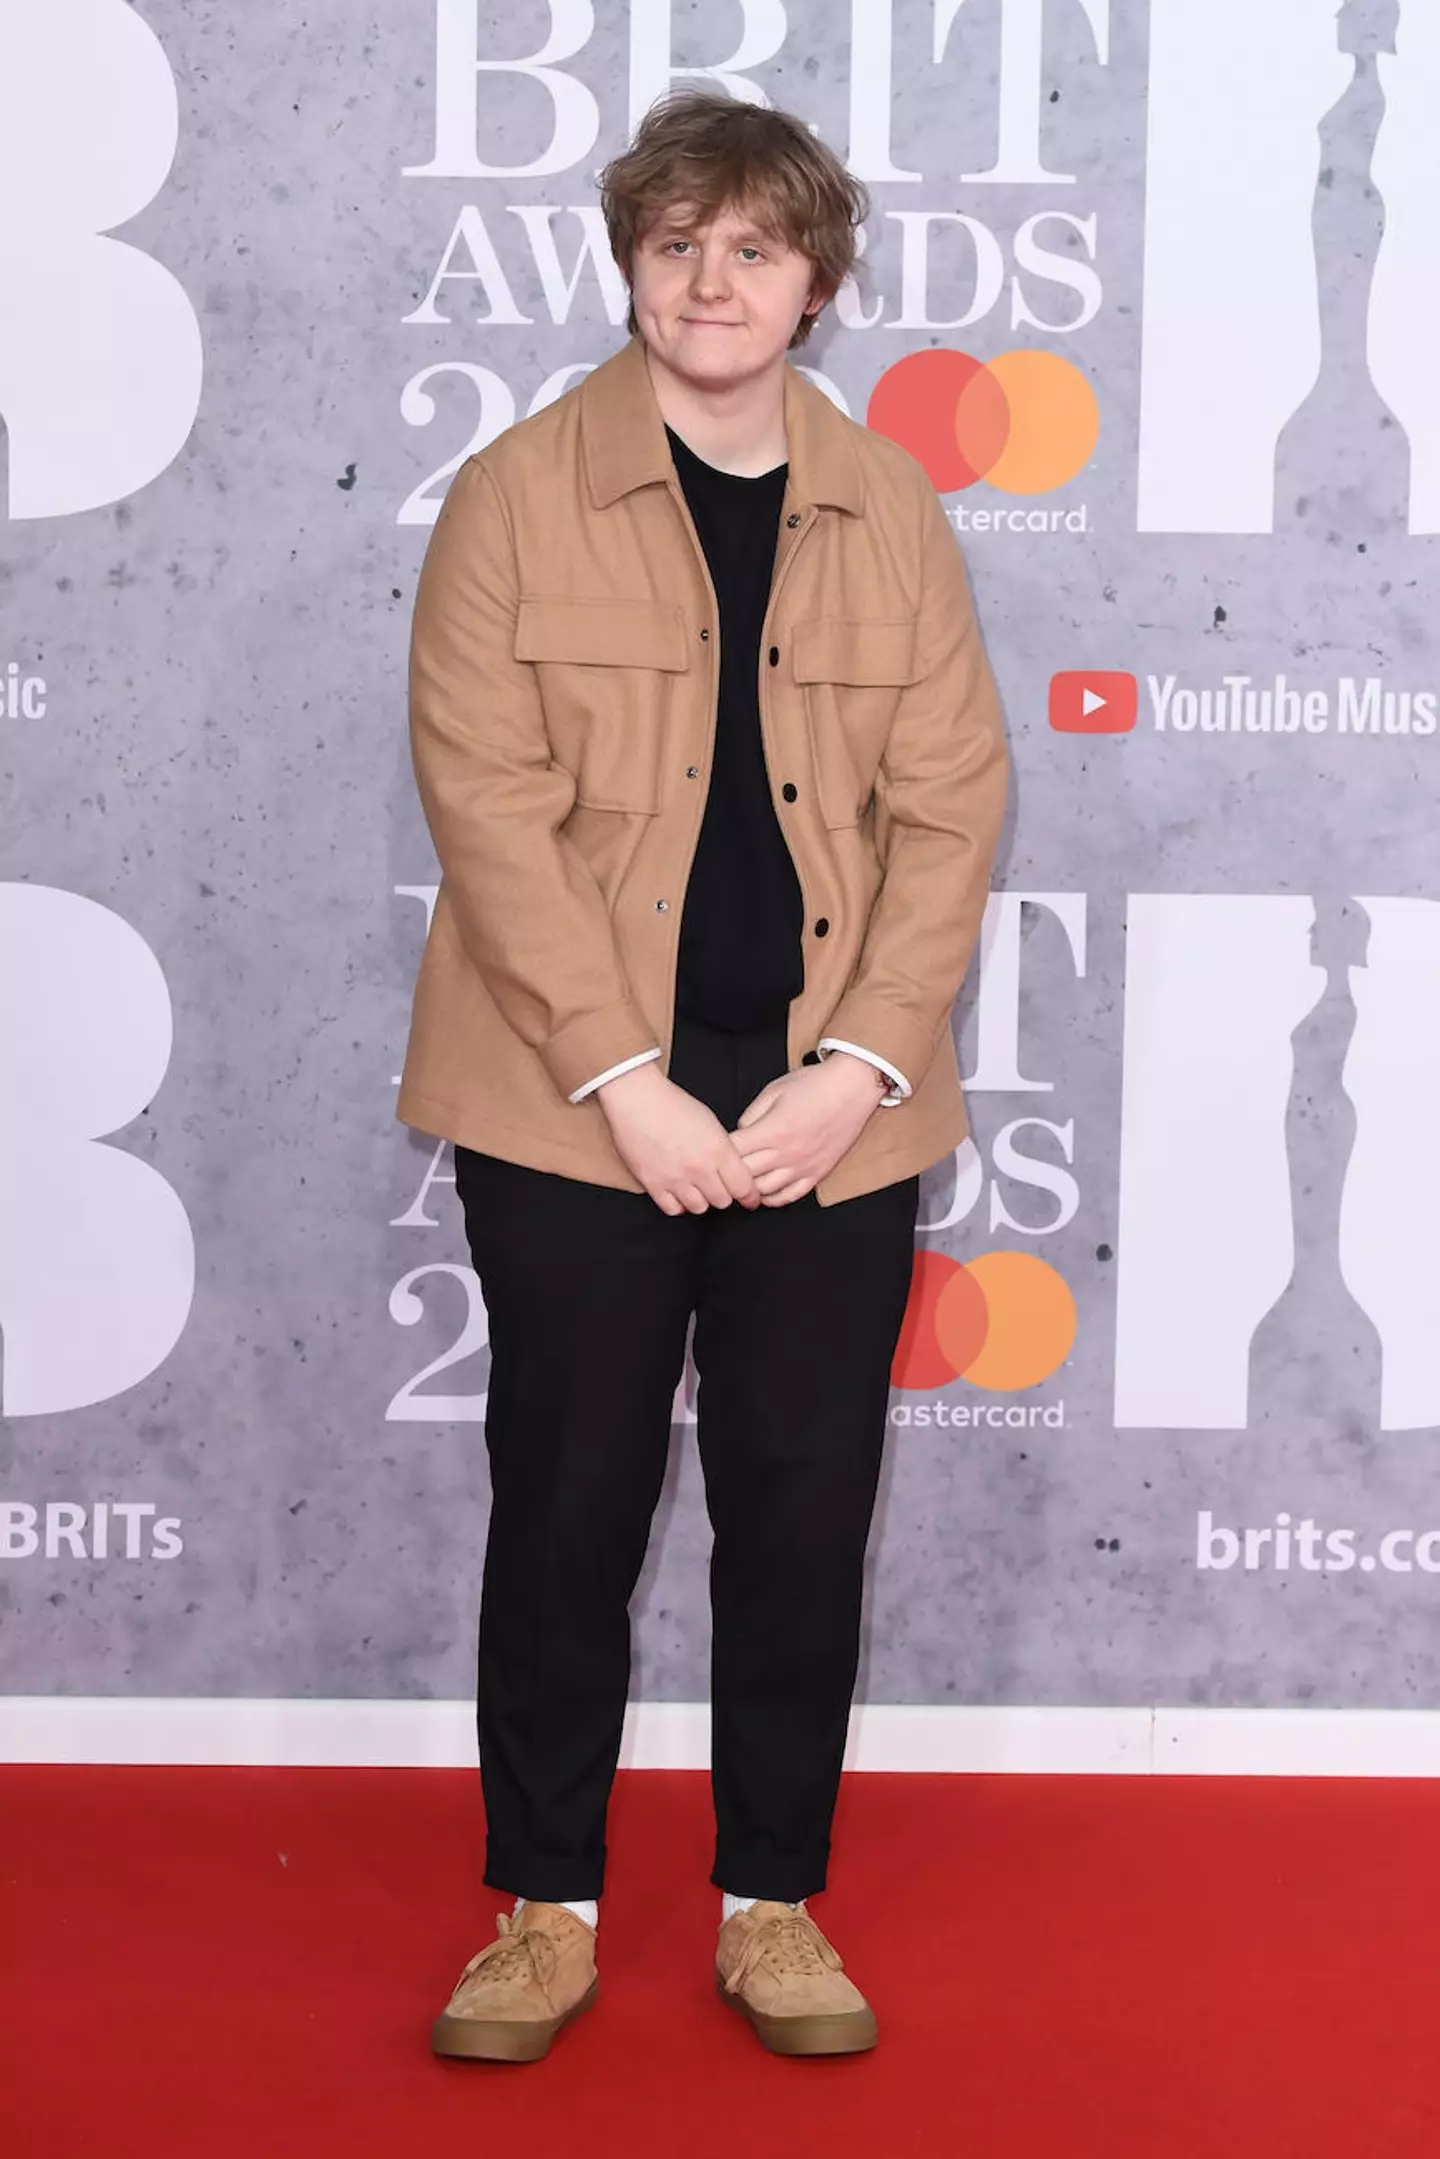 Chart topper Lewis Capaldi has revealed that he has been diagnosed with Tourette’s syndrome.